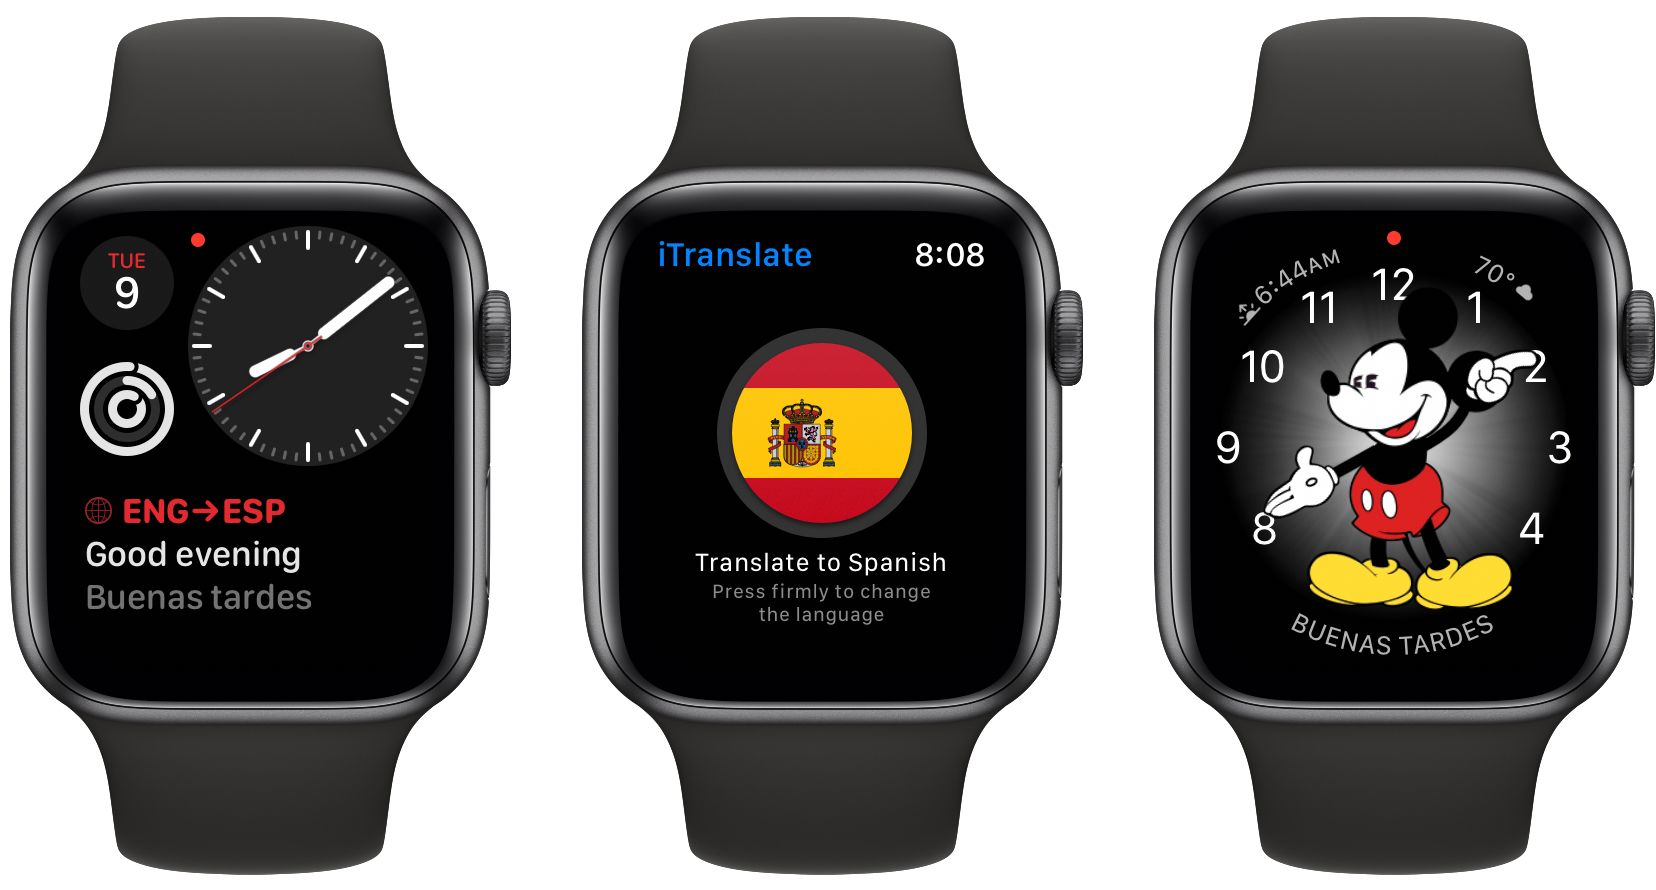 IHG Hopes Its Smartphone Language App Will Translate to the Apple Watch